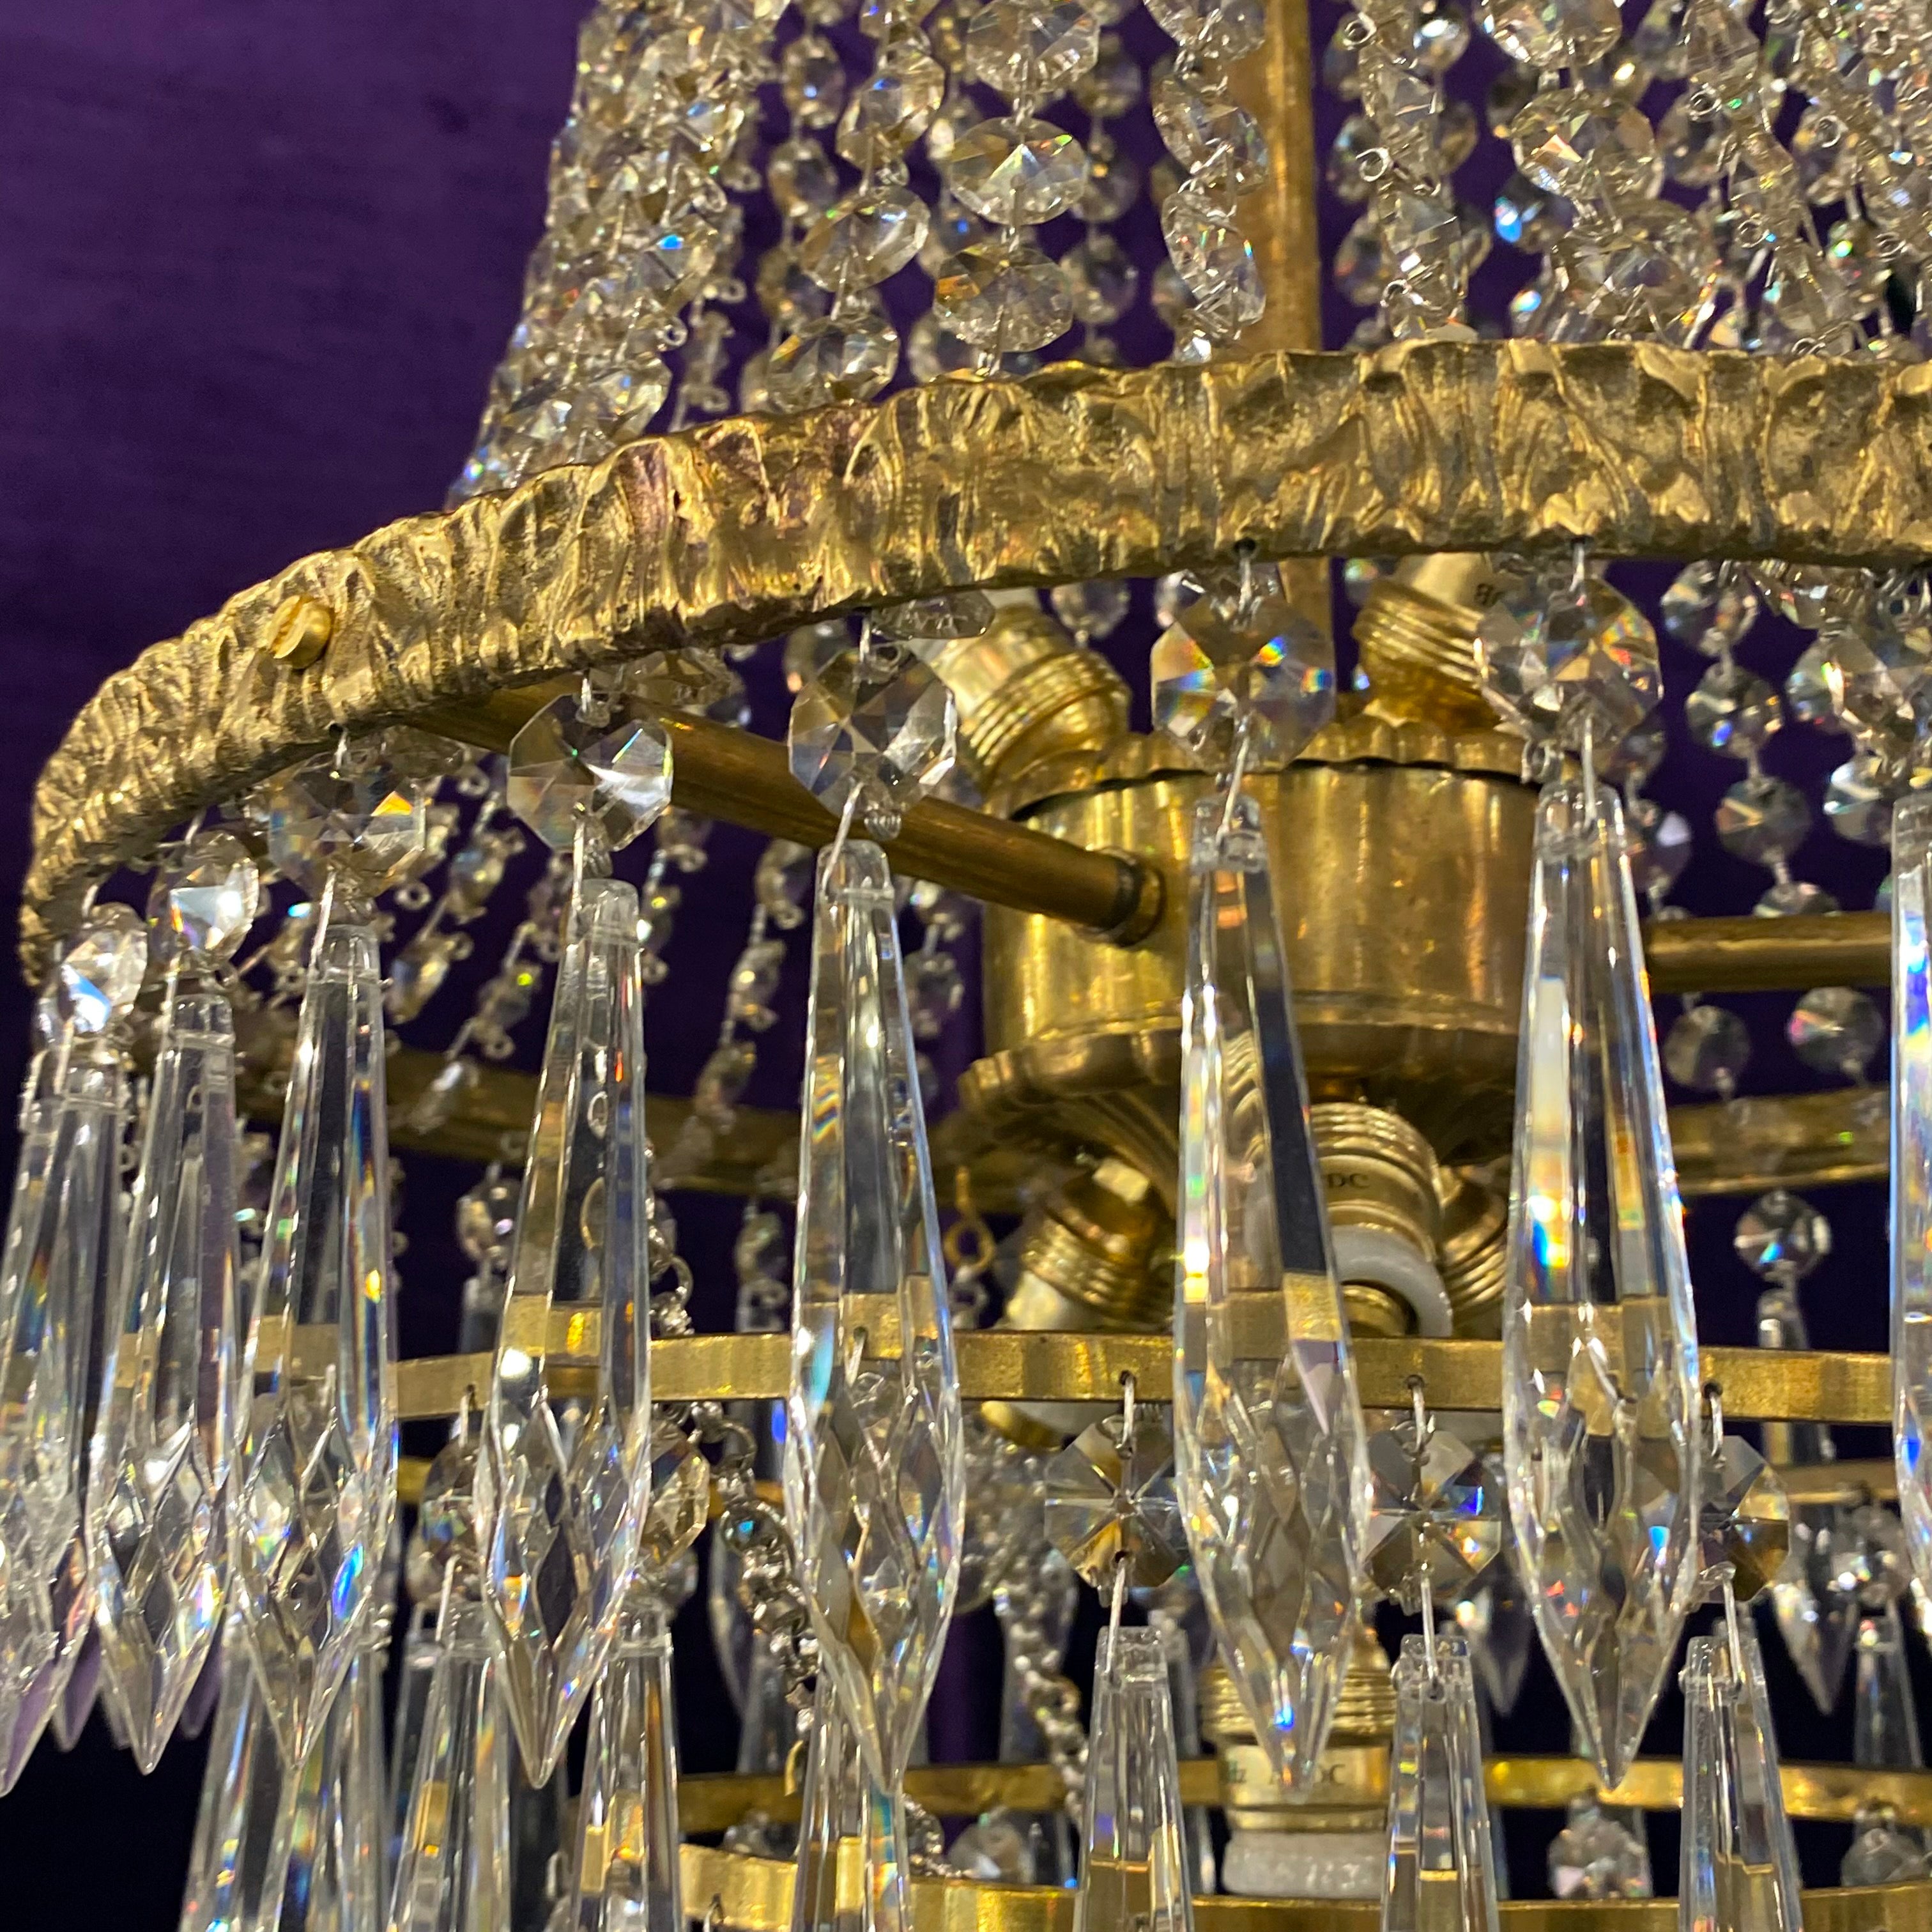 Aged Brass and Crystal Neoclassical Chandelier